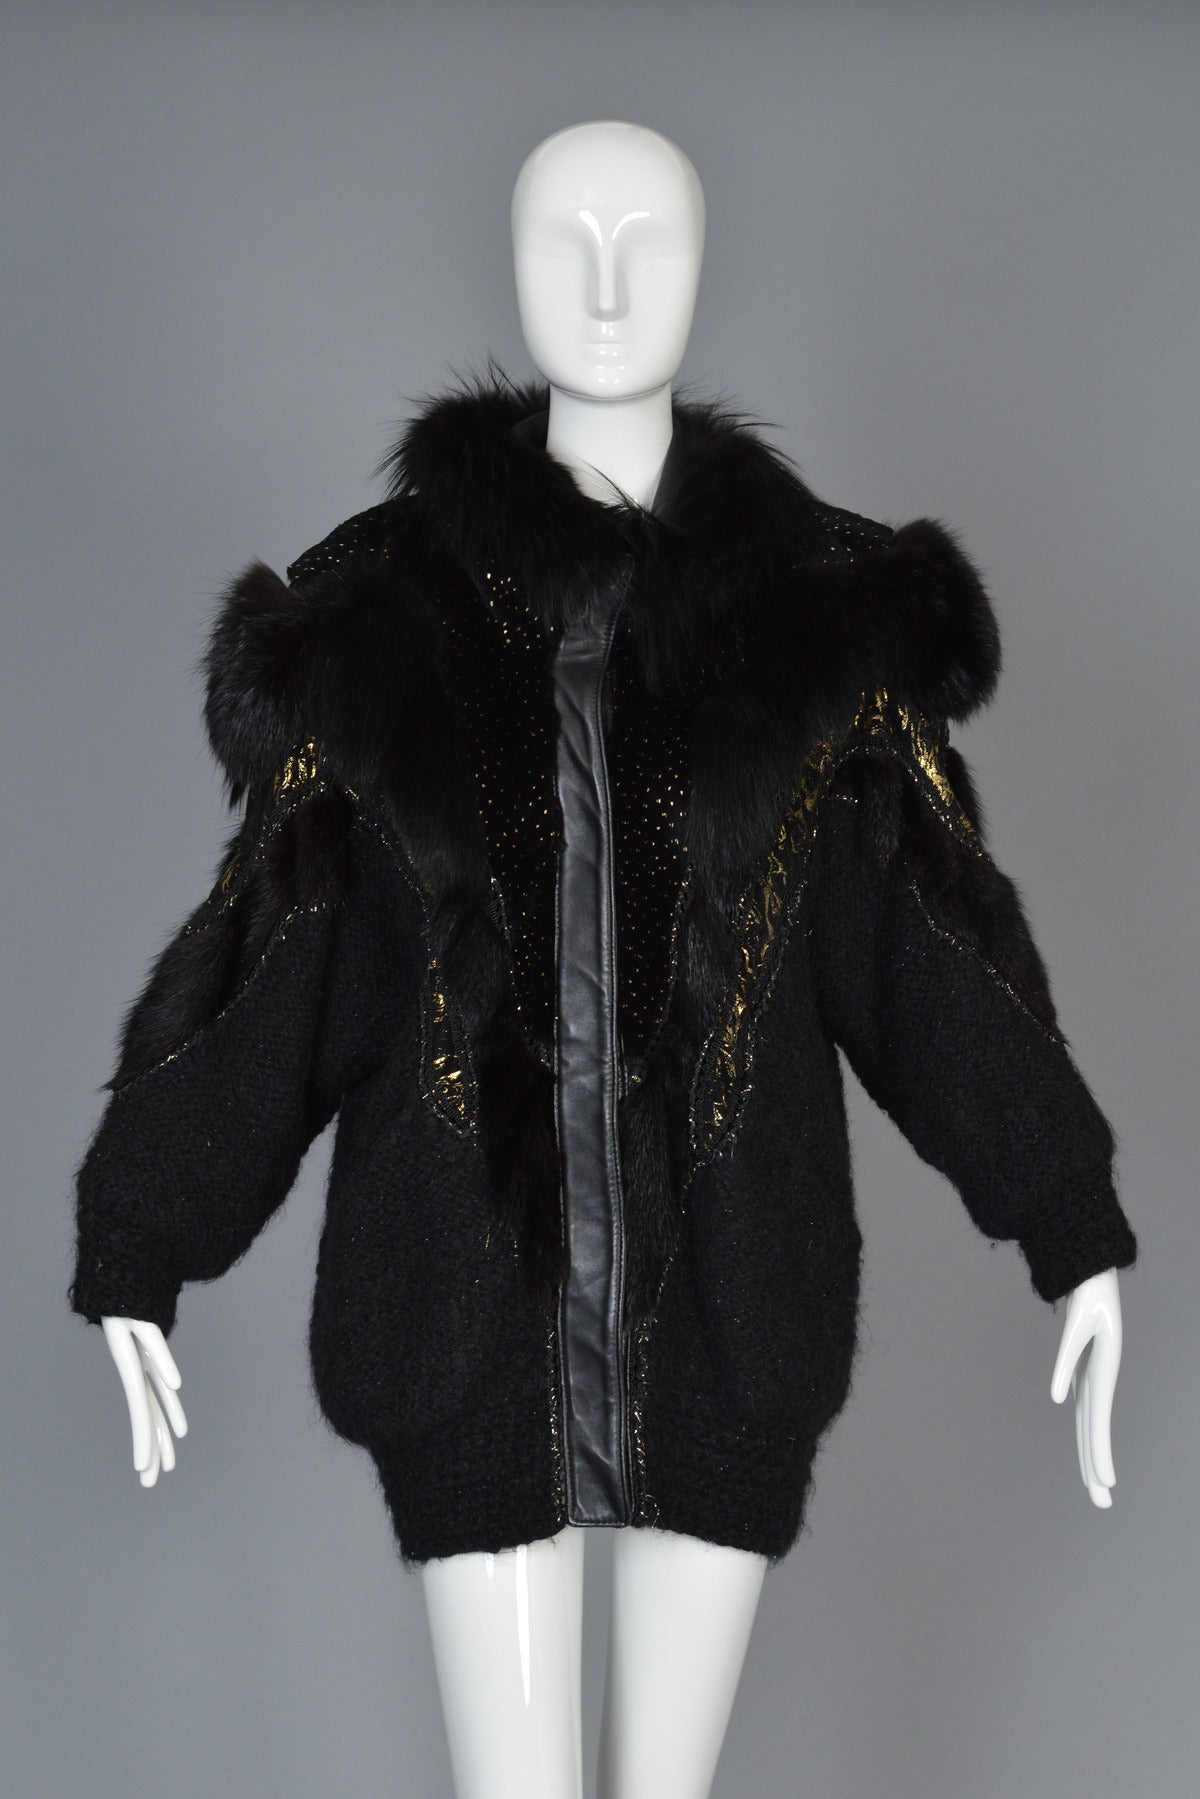 Recently reduced from $650 to $450

Seriously awesome vintage 1980s black heavy-weight mohair + acrylic knit coat. Incredible, avant garde find! Cocoon cut with besom pockets and raglan sleeves. Snapping front with black leather plackets. AMAZING